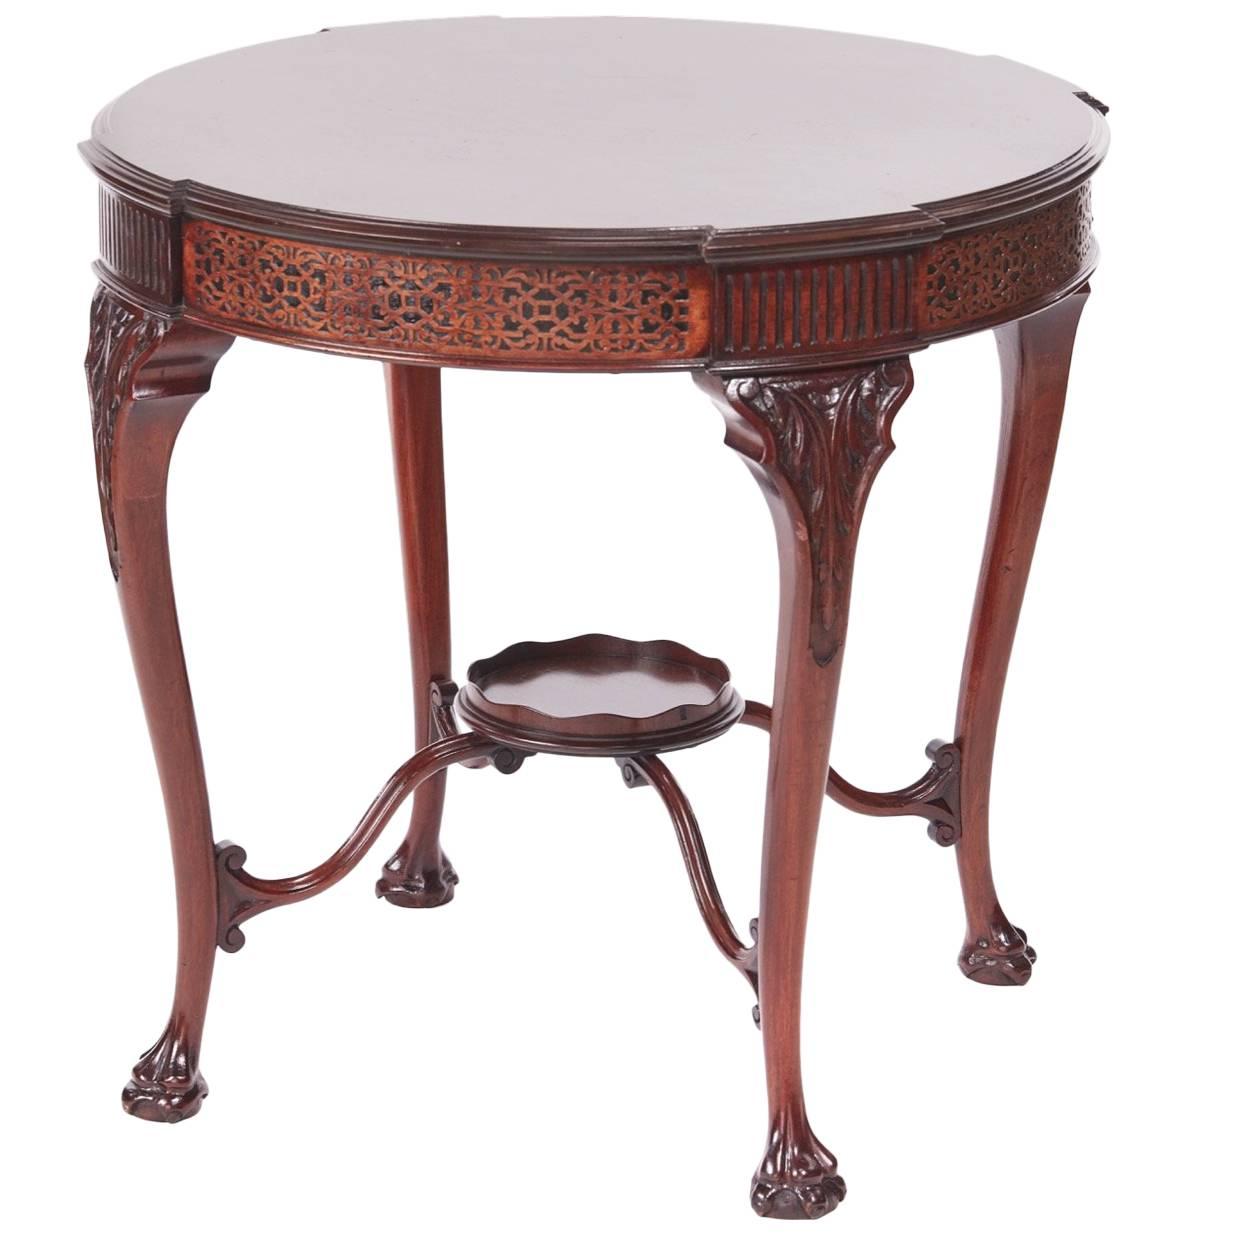 Quality Antique "Chippendale Revival" Mahogany Centre Table For Sale